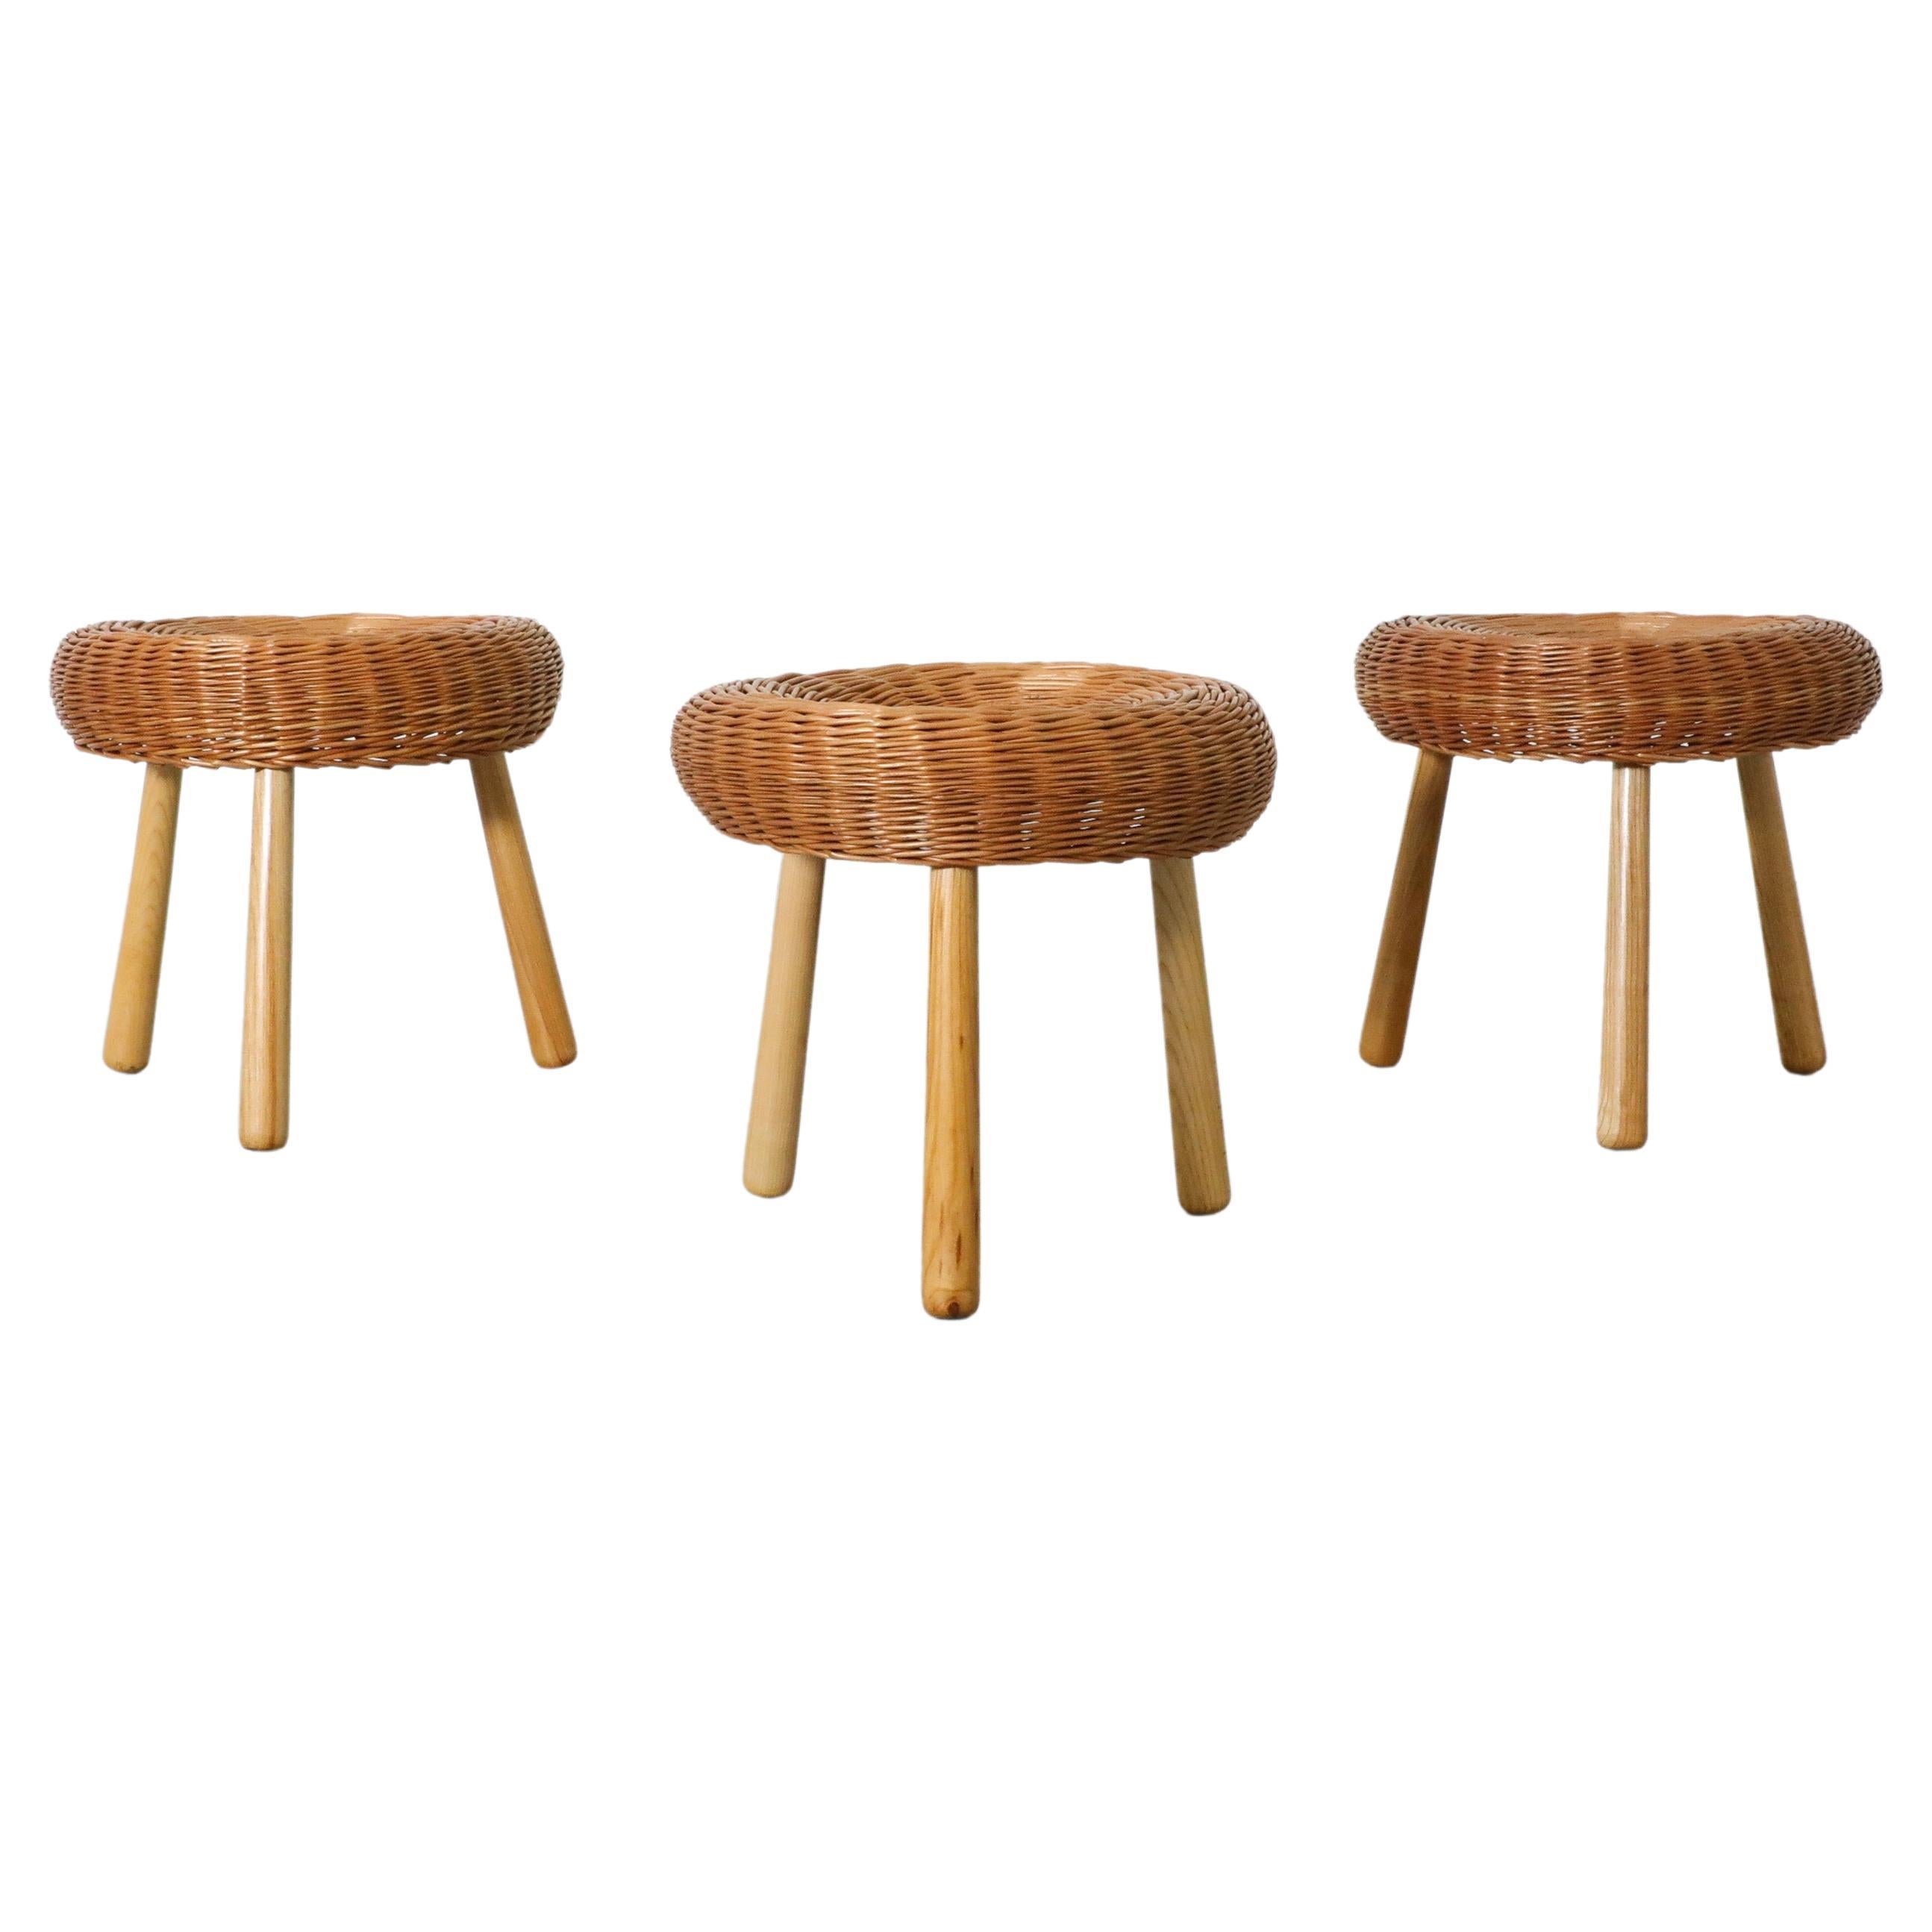 Tony Paul Attributed Woven Rattan Tripod Stools with Tapered Solid Wood Legs For Sale